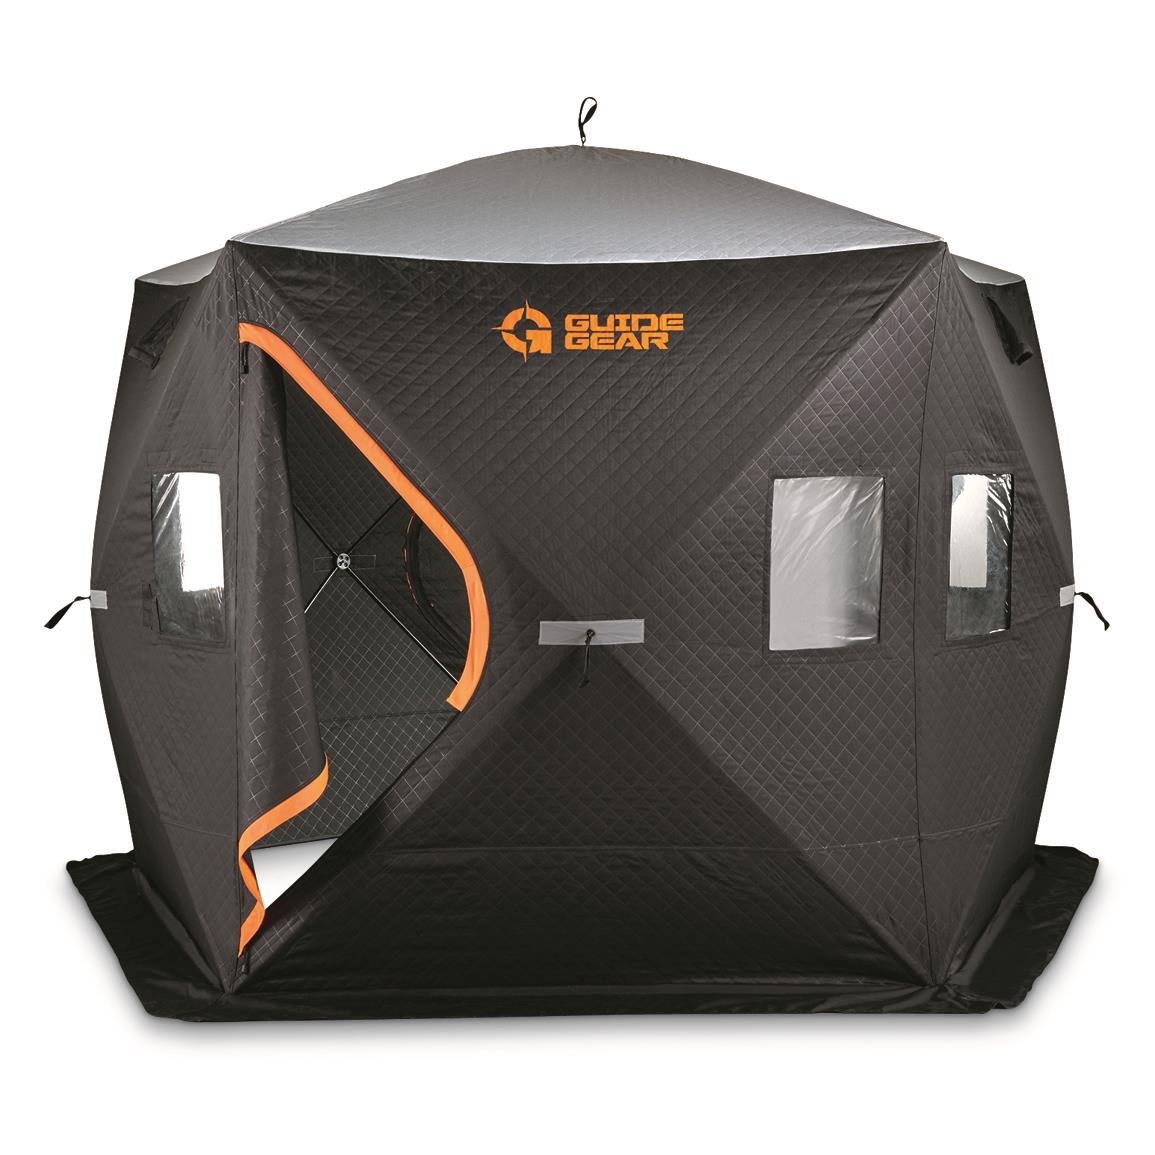 Guide Gear® 5Hub Fully Insulated Ice Fishing Shelter